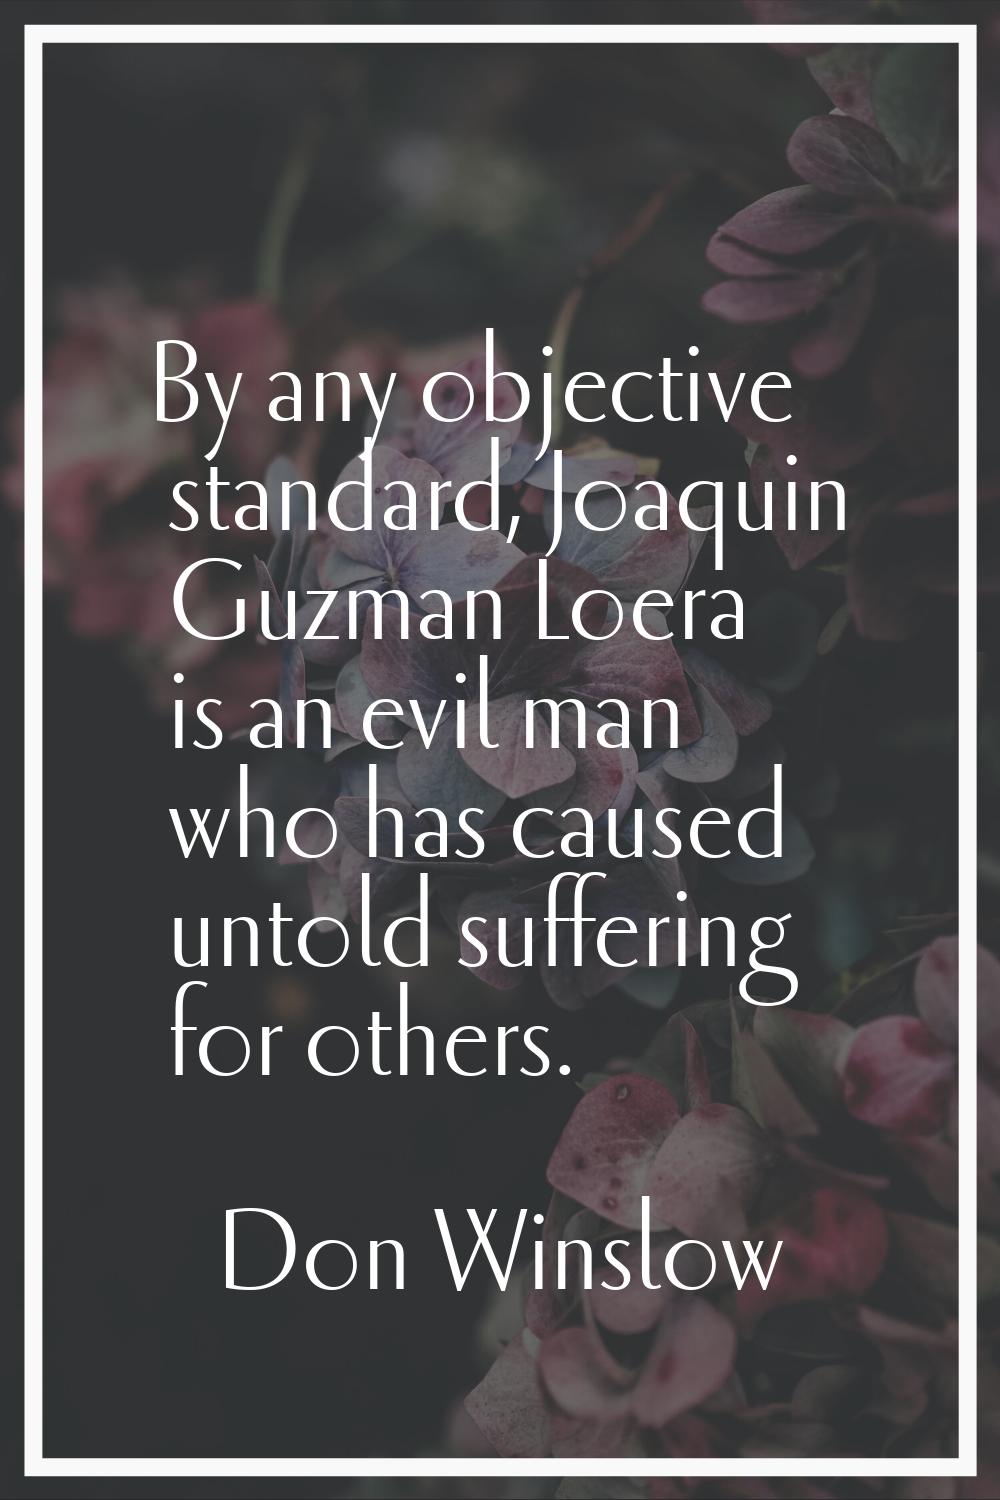 By any objective standard, Joaquin Guzman Loera is an evil man who has caused untold suffering for 